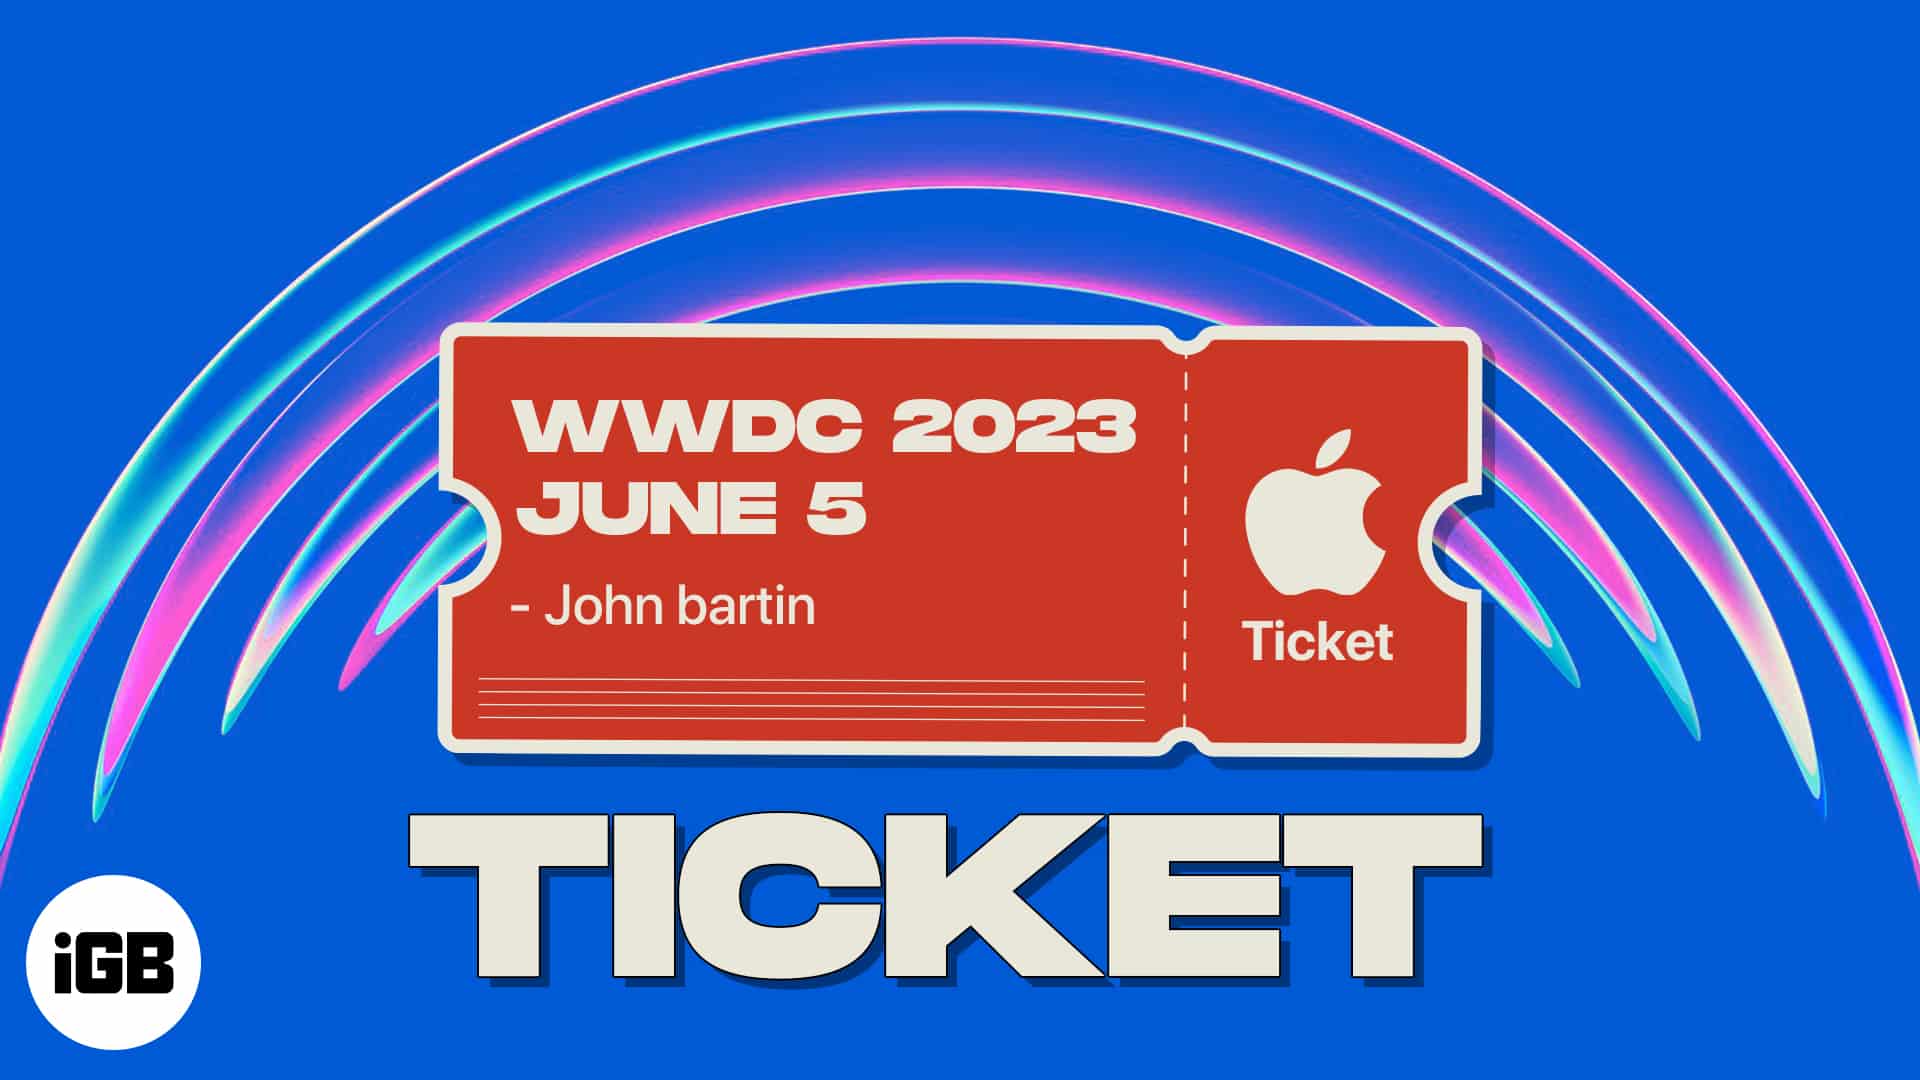 How To Get In Person Tickets For WWDC 2023 